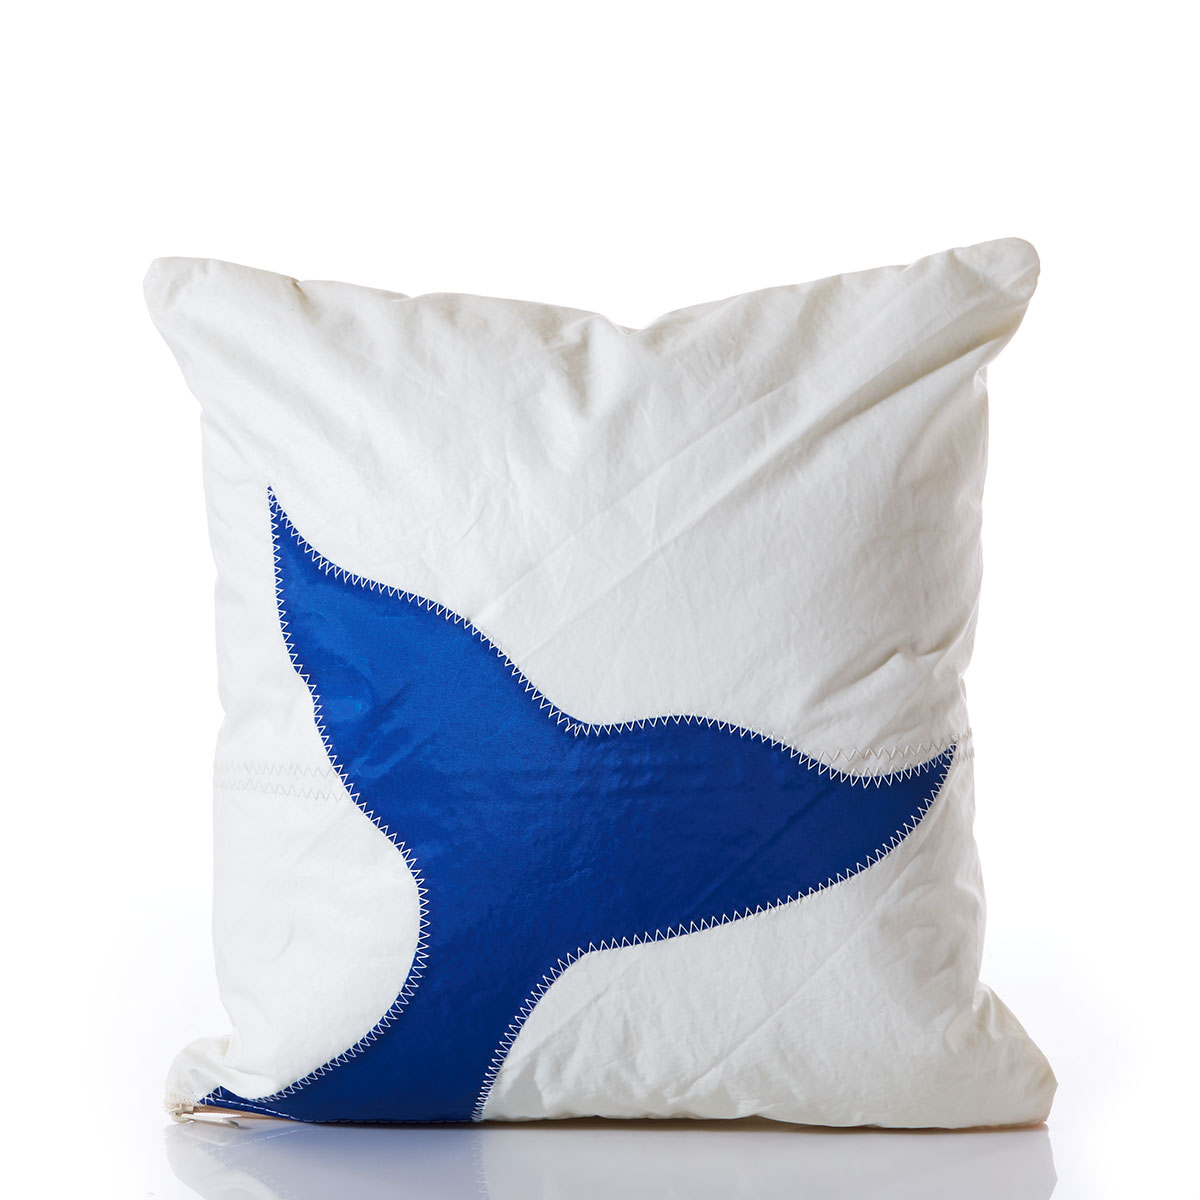 blue whale tale on white recycled sail cloth pillow